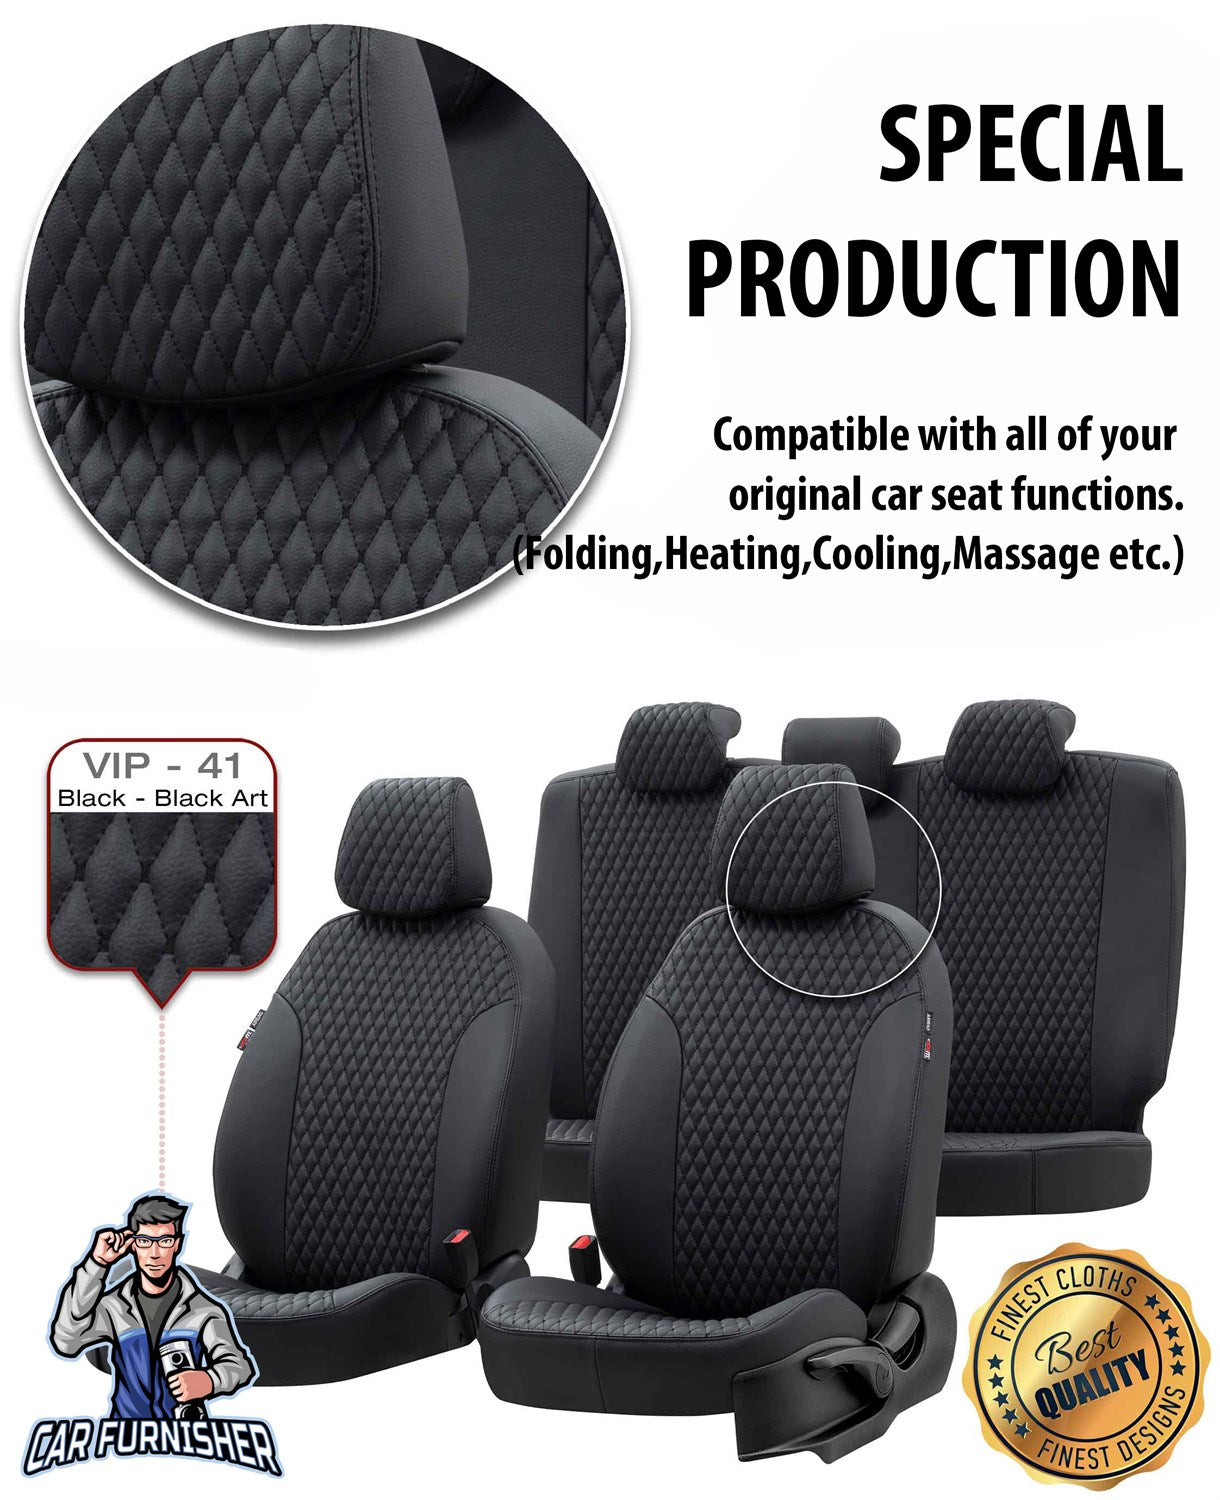 Renault Fluence Seat Covers Amsterdam Leather Design Black Leather